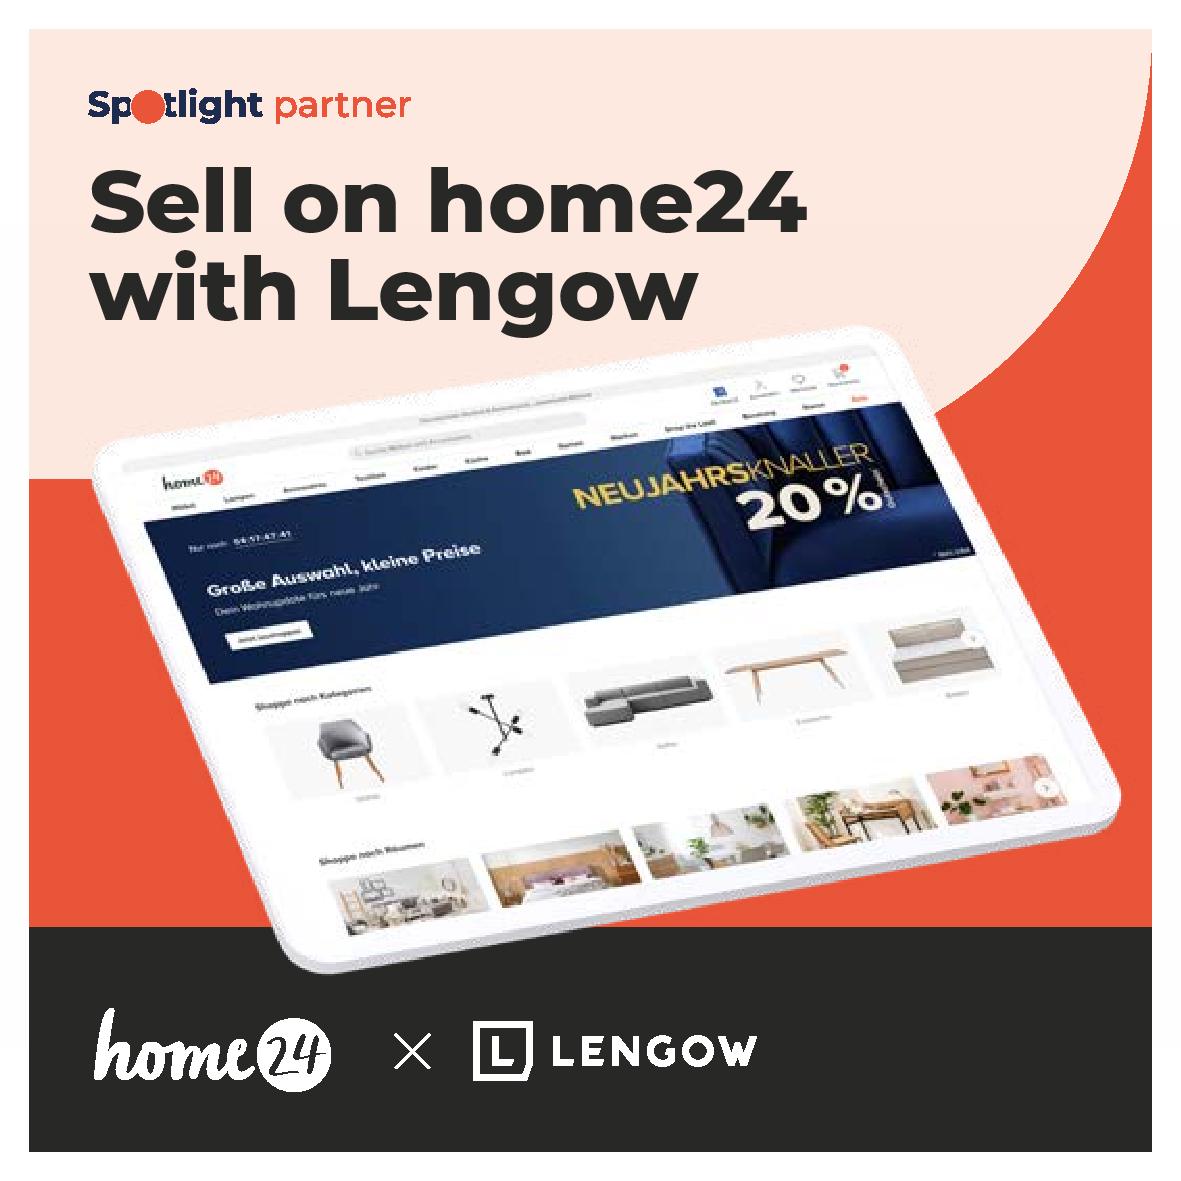 Sell on the marketplace home24